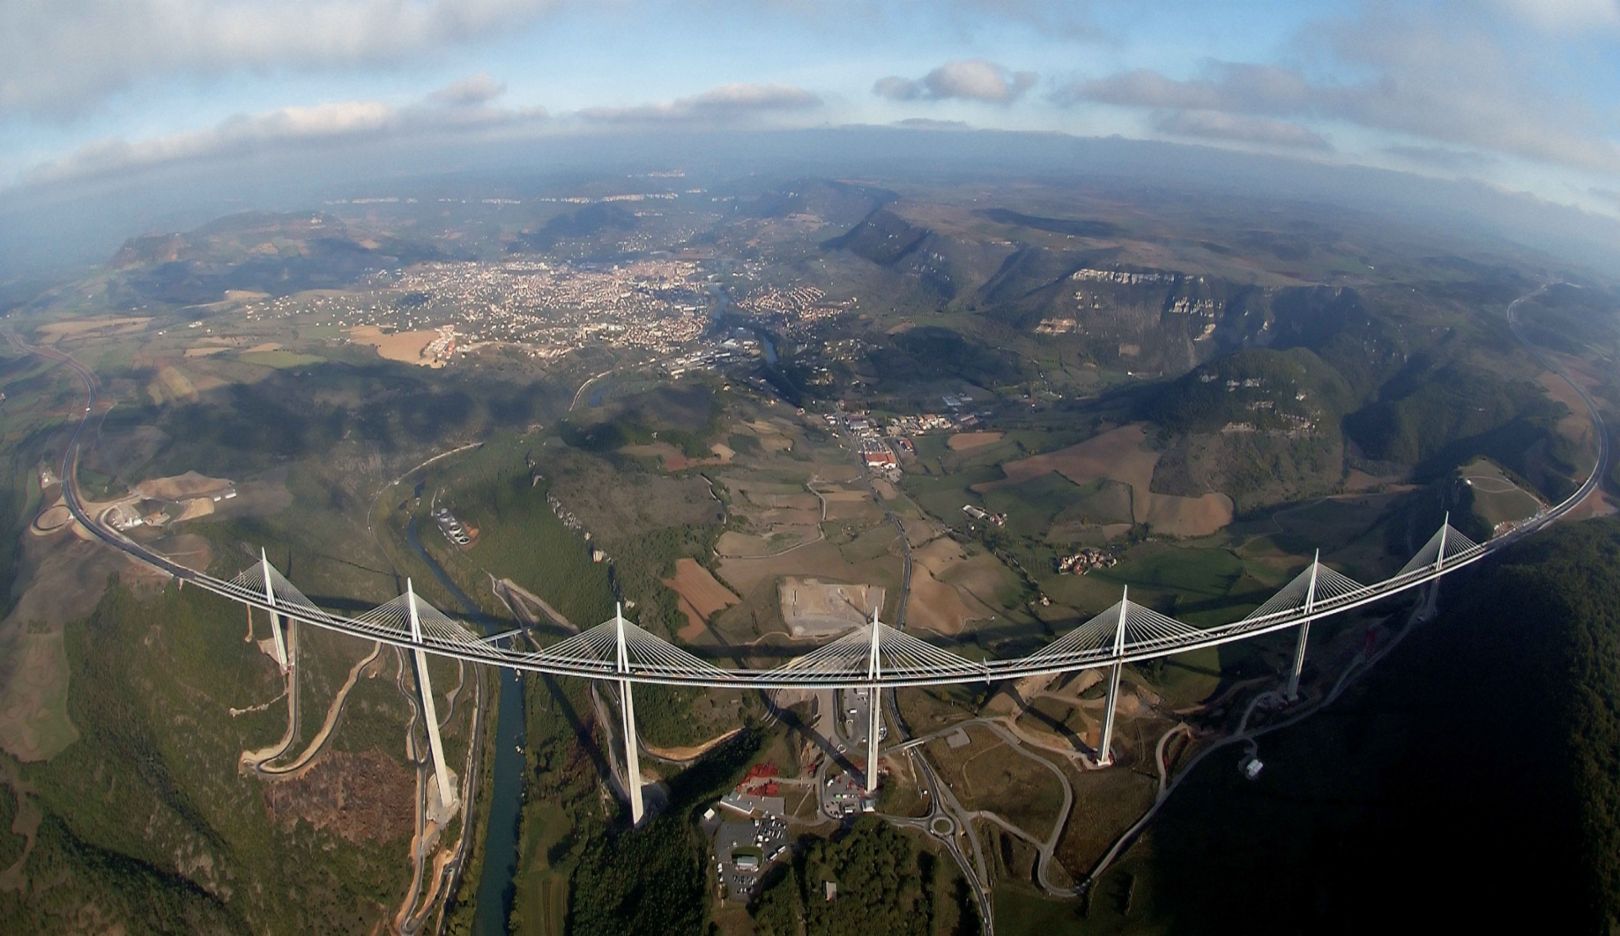 The Millau Viaduct set multiple records on completion in 2004. It is the world's longest cable-stayed bridge, and at 343 meters the highest edifice in France. It is located on the route from Paris to the Mediterranean. Photo: Stephane Compoint / Foster + Partners